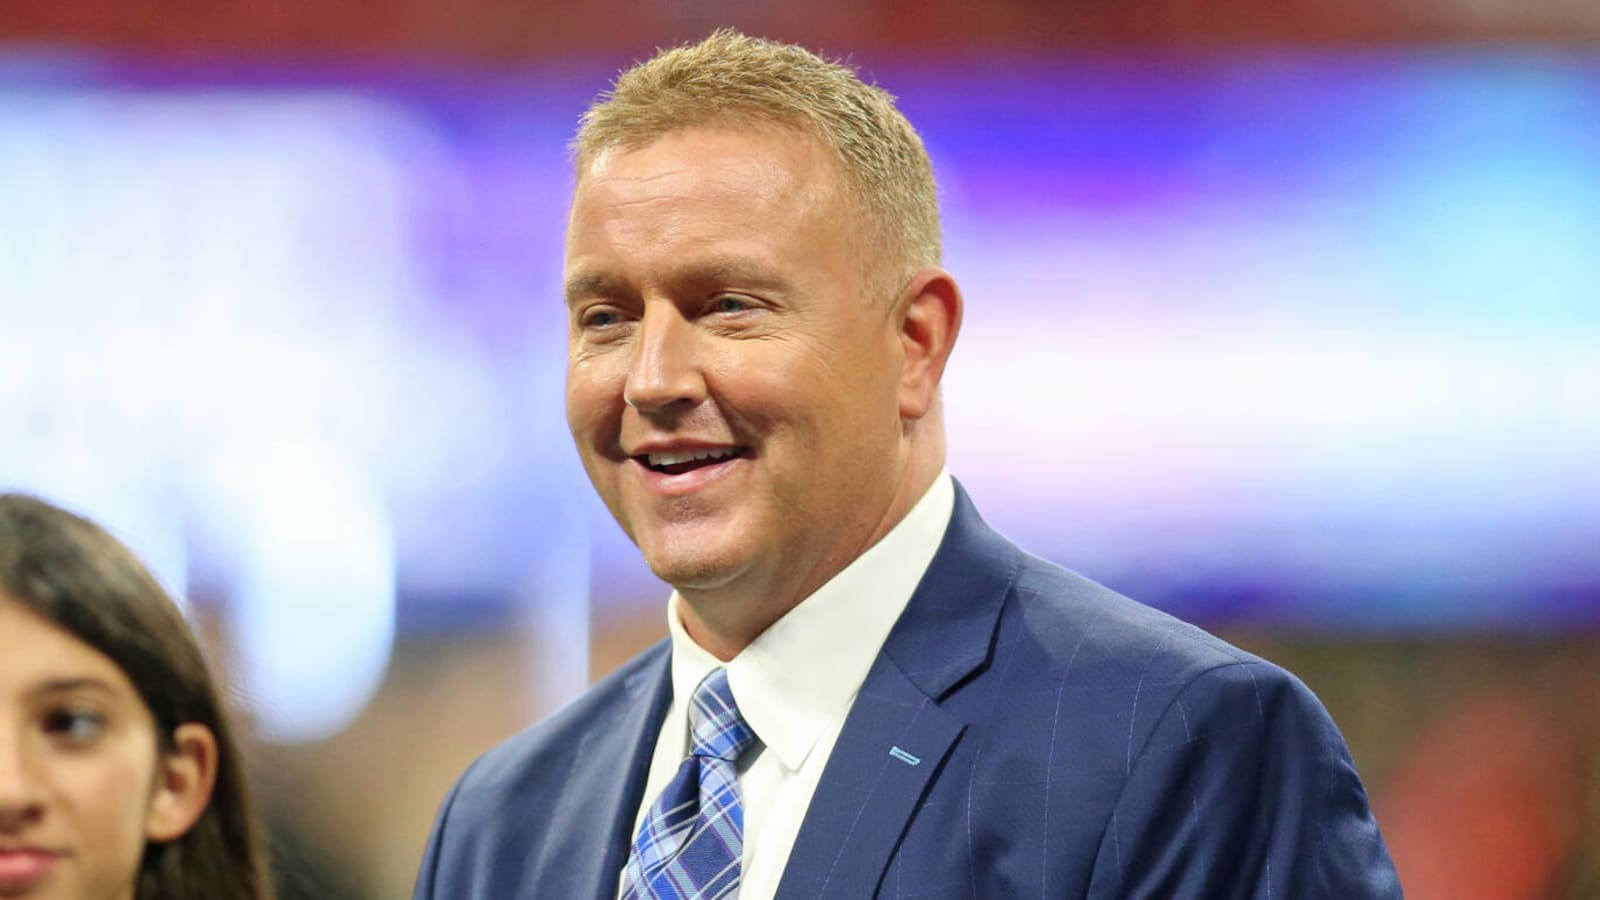 Kirk Herbstreit has called 33 games this football season between CFB and the NFL